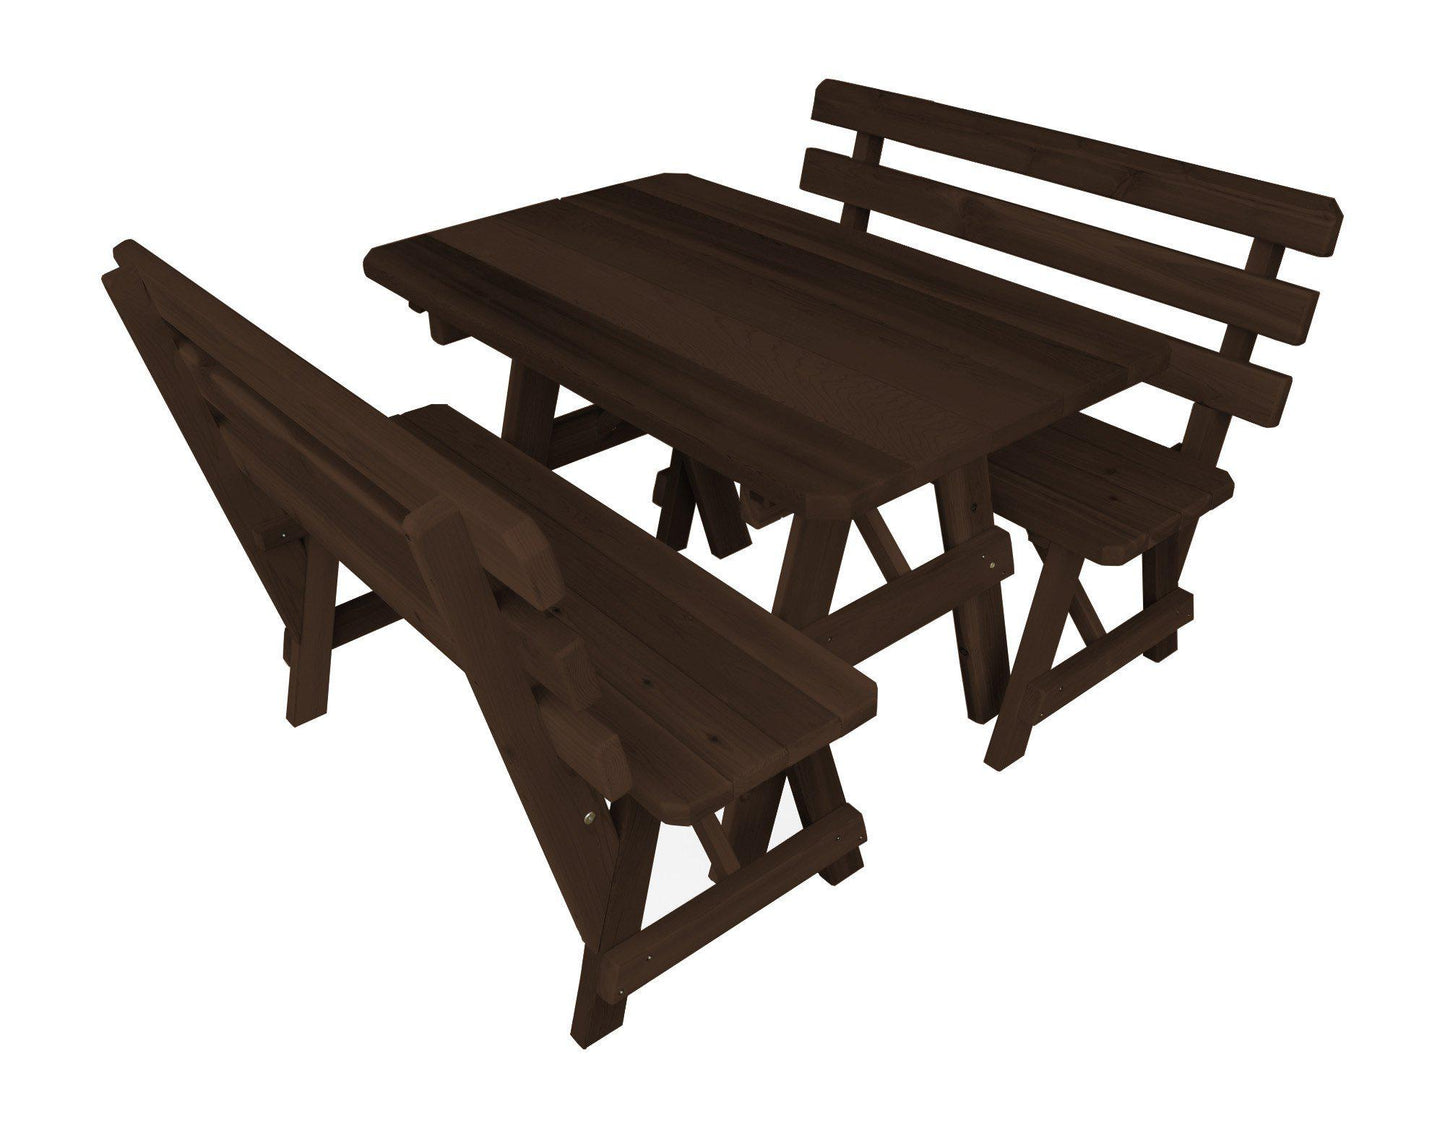 Regallion Outdoor Western Red Cedar 55" Table w/2 Backed Benches - LEAD TIME TO SHIP 2 WEEKS